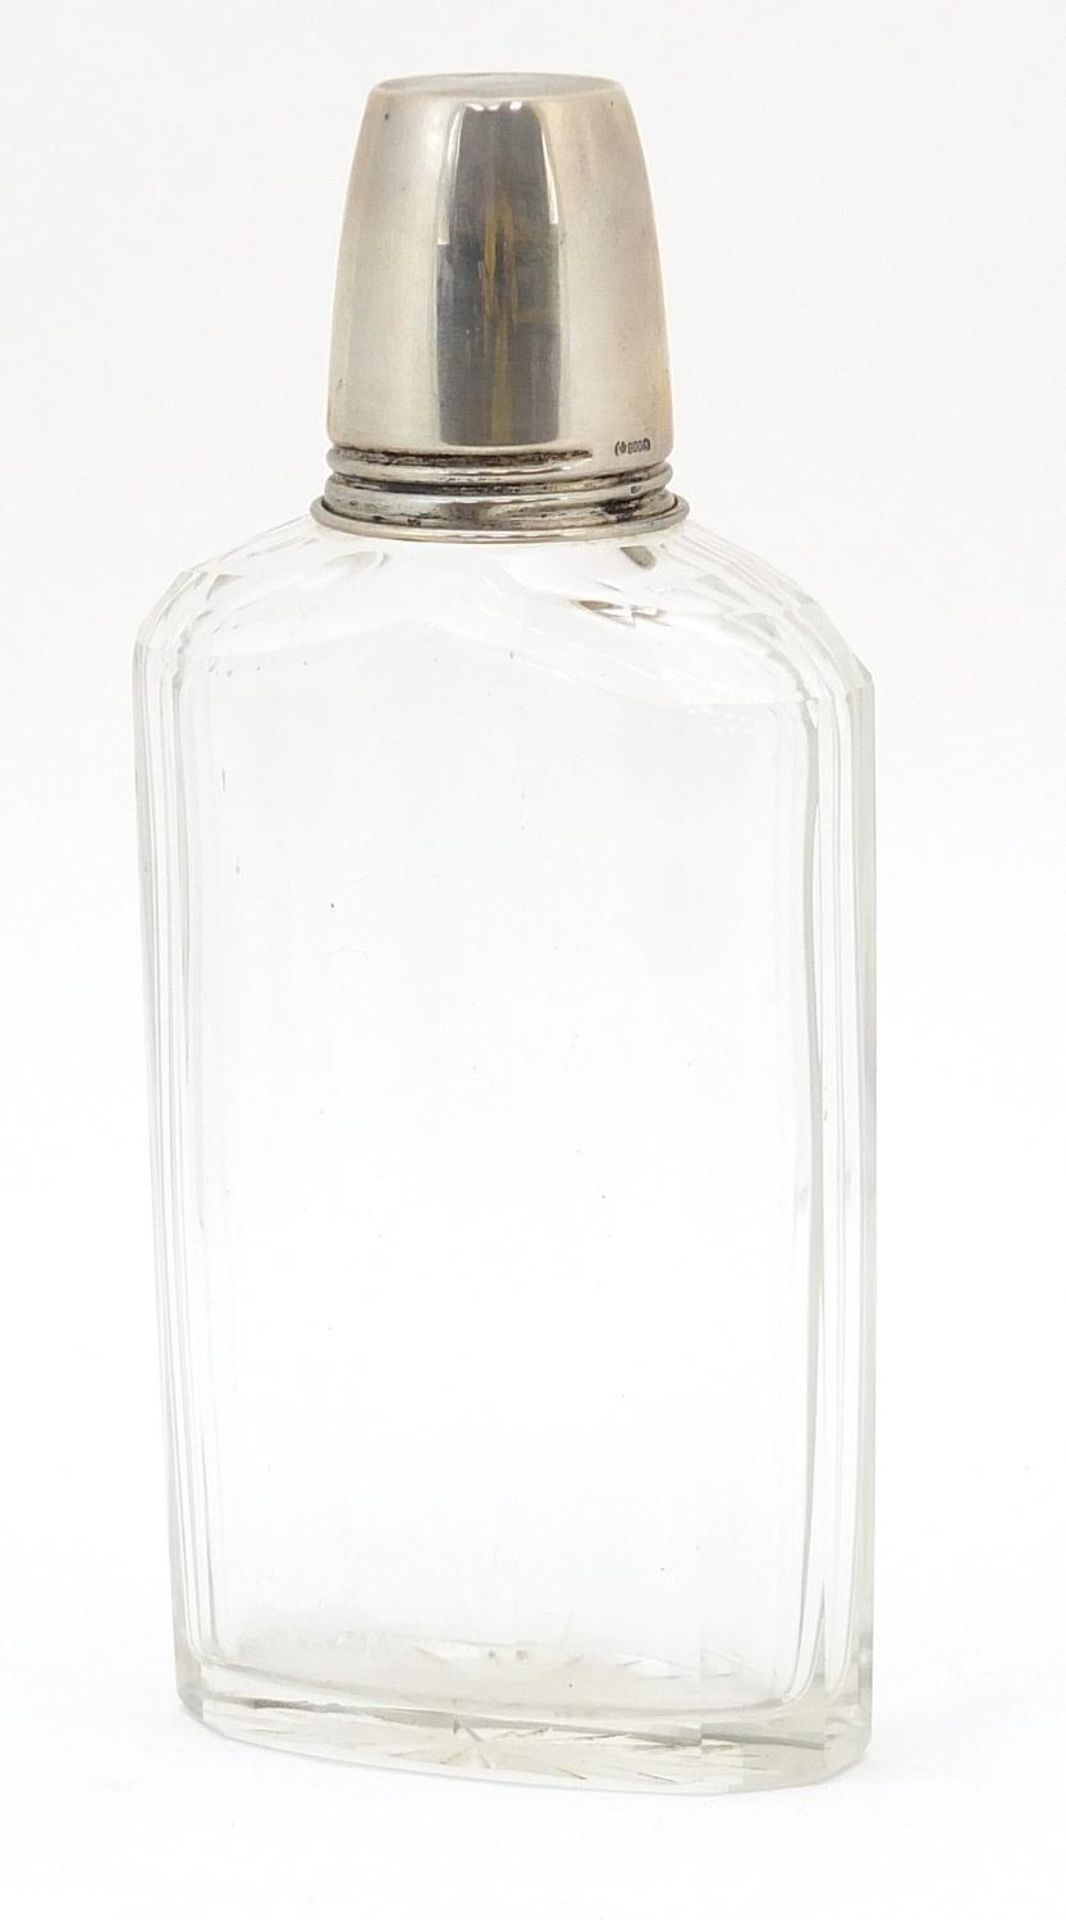 German silver and cut glass flask, 16cm high - Image 2 of 5